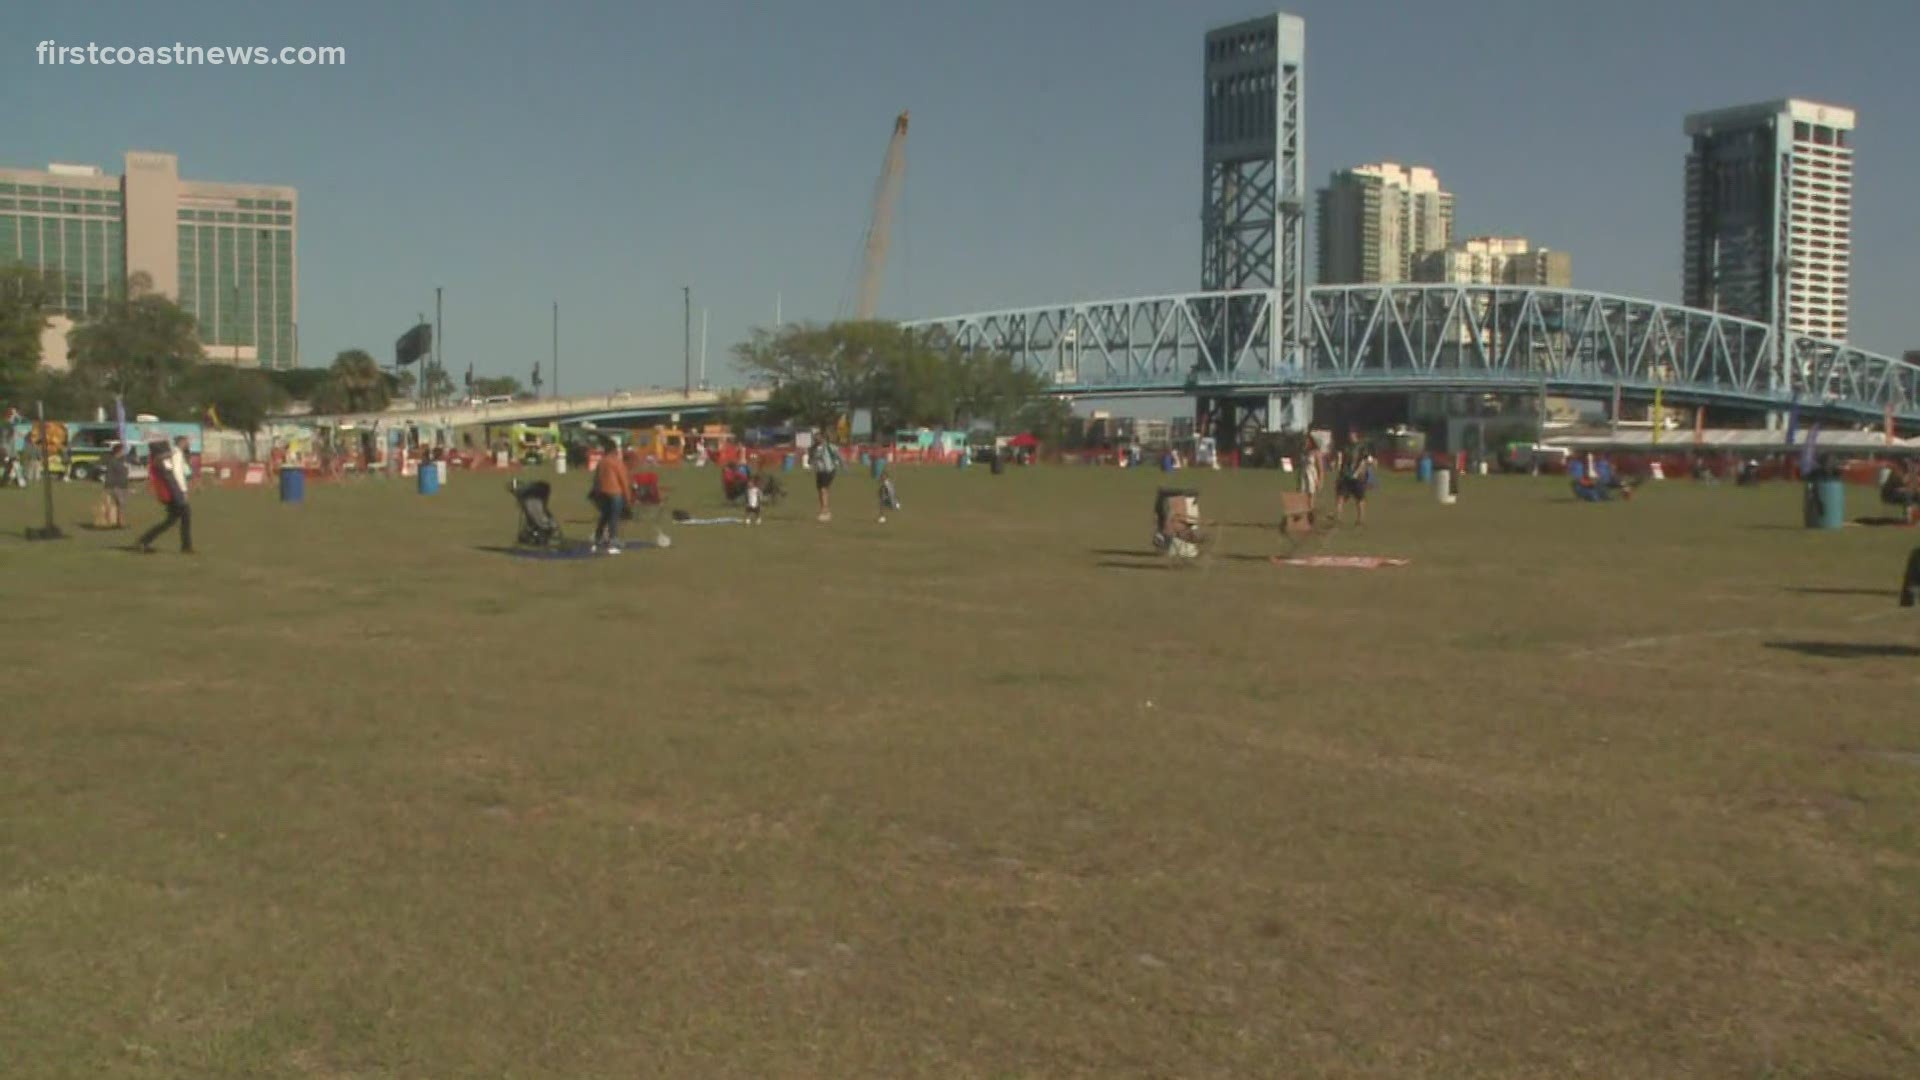 New changes coming to Downtown Jacksonville